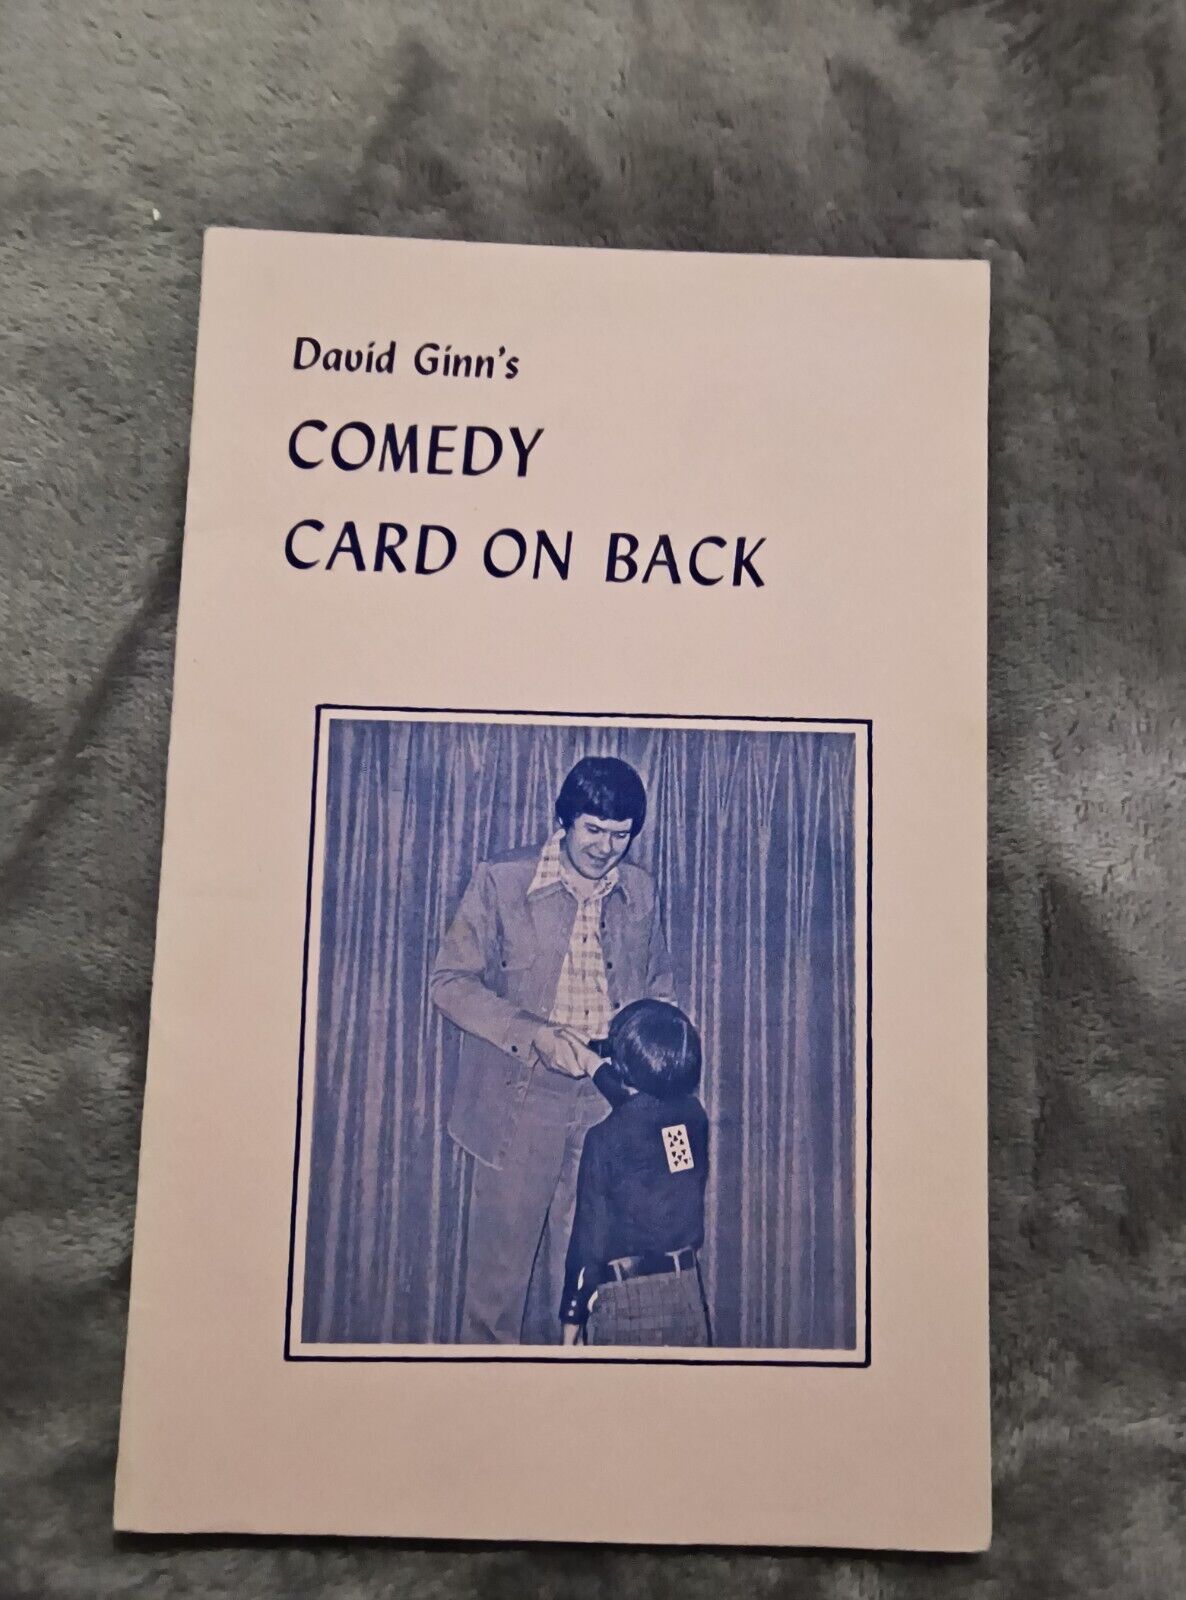 Comedy Card On Back by David Ginn - Paperback Booklet - Kids Show Magic 